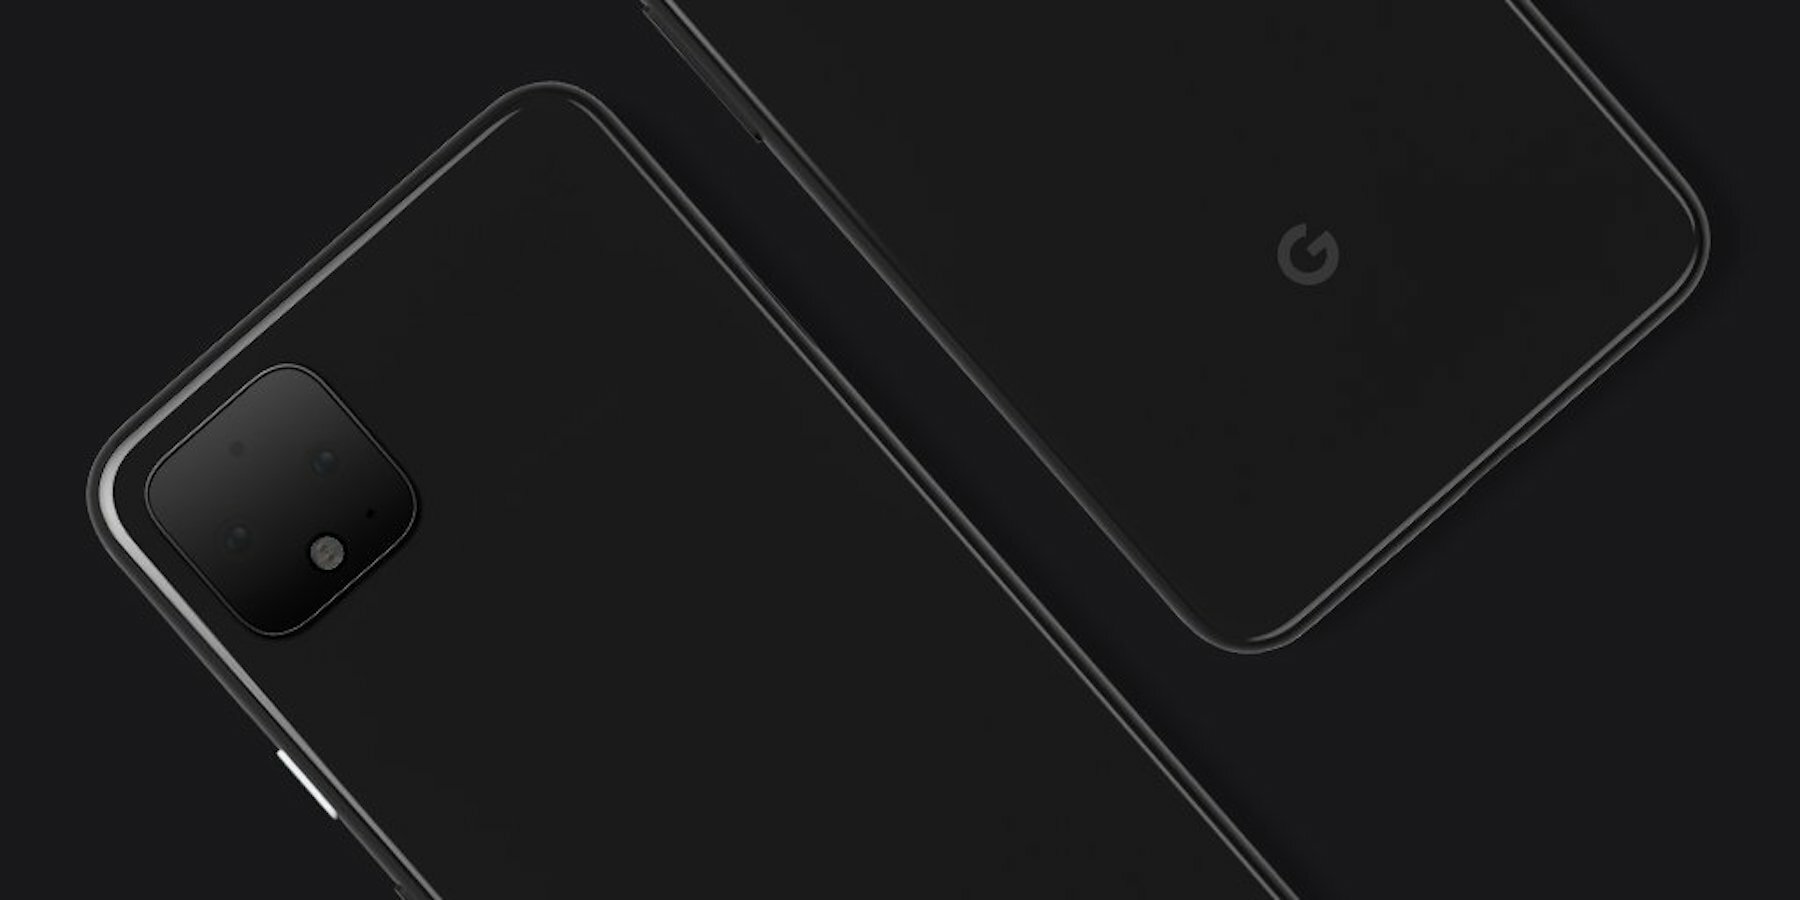 What will the Google Pixel 4 look like?